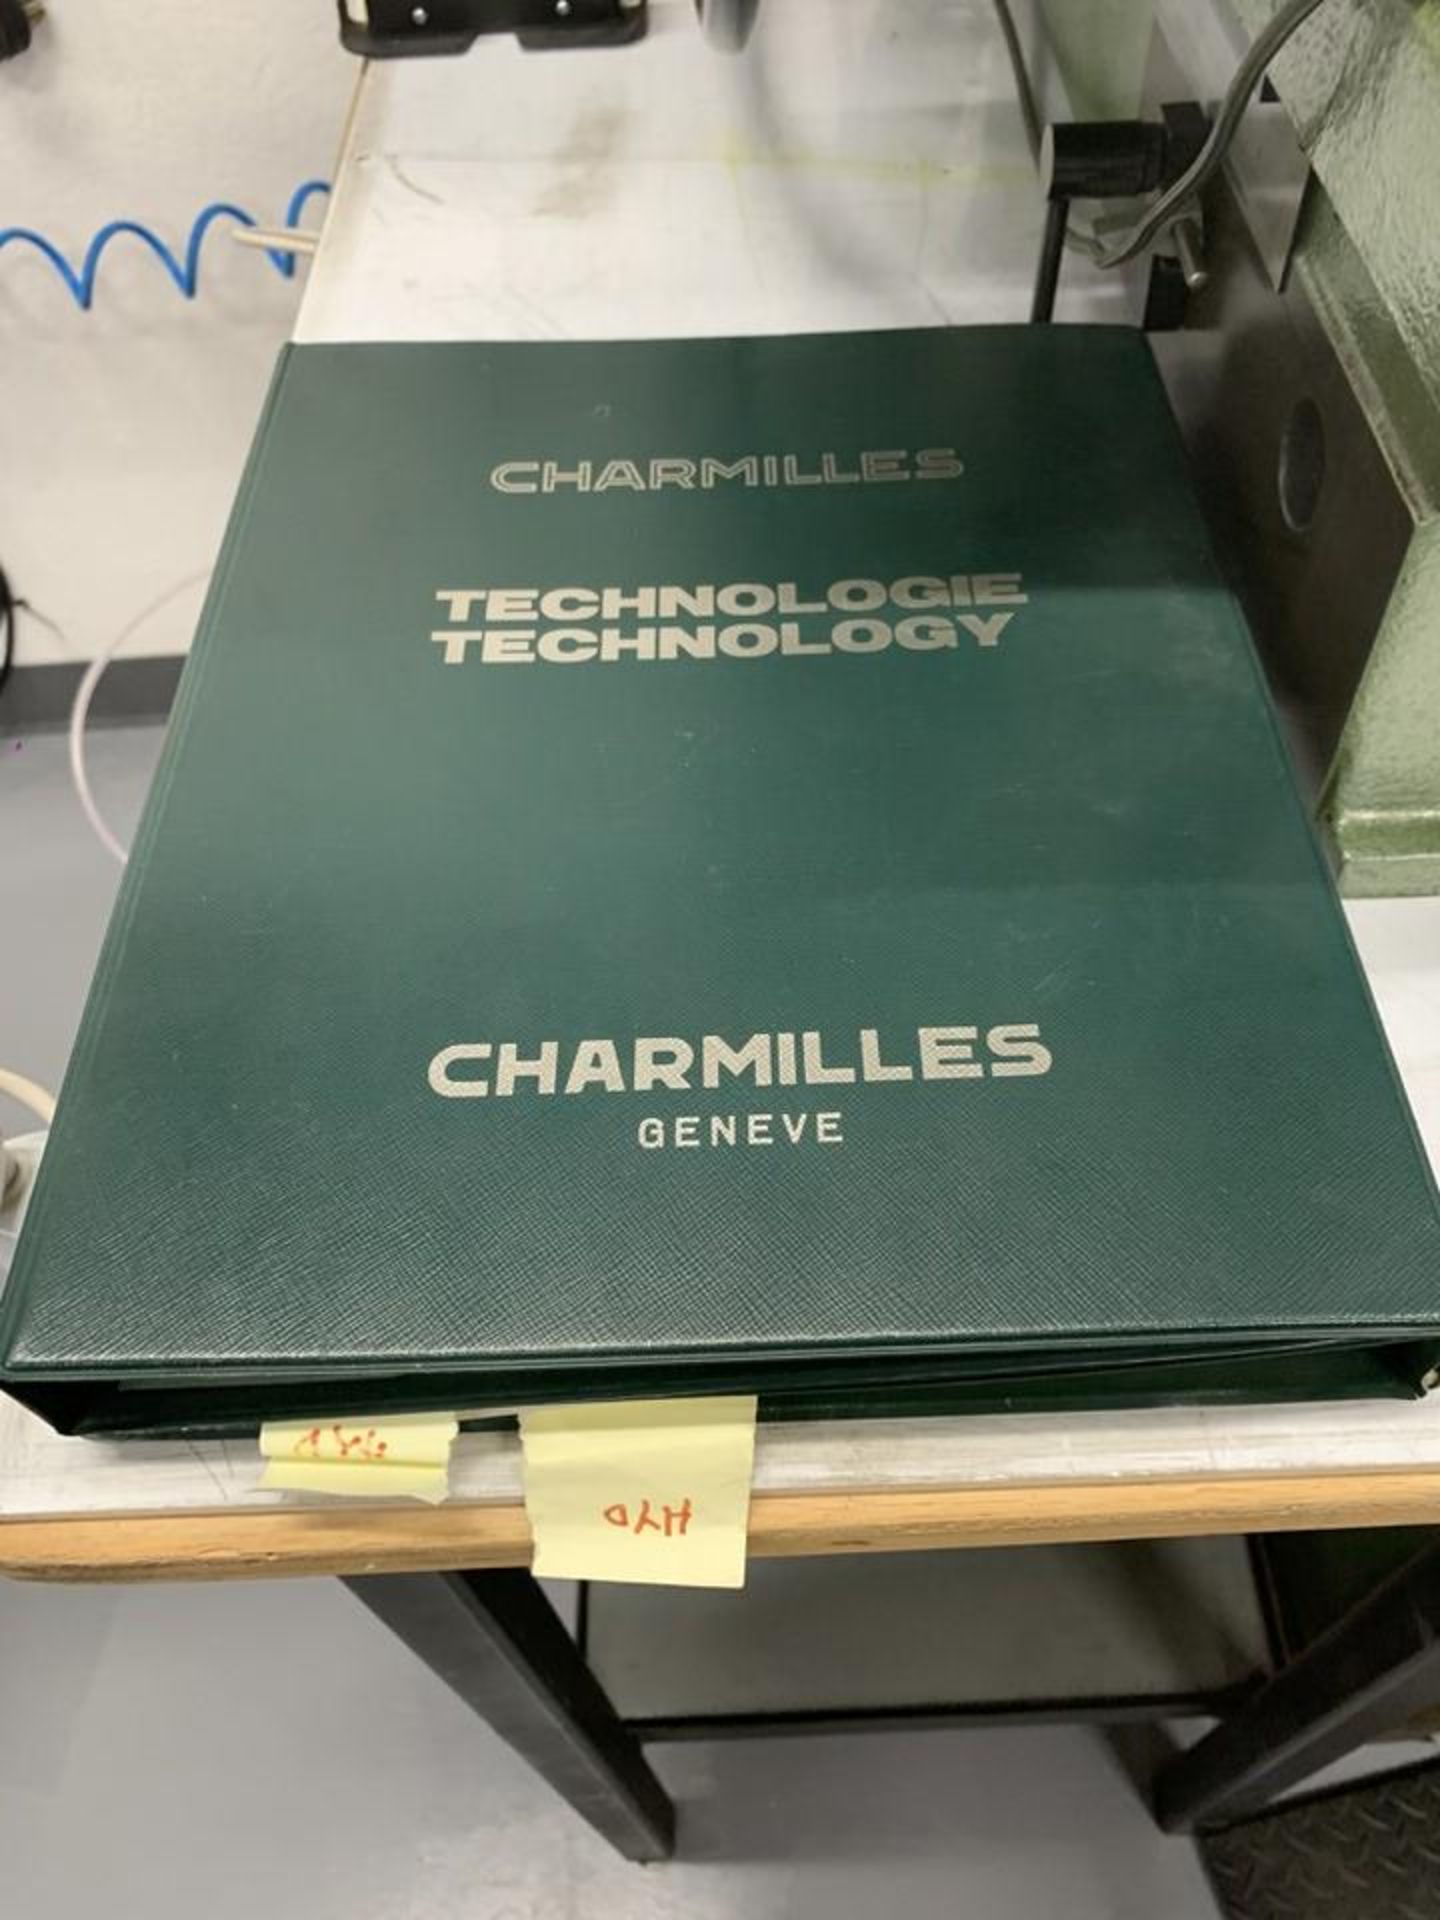 CHARMILLES D10 EDM MACHINE, 9" X 14" TABLE, 4" X 7" MAGNETIC CHUCK, MITUTOYO DRO, ASSORT TOOLING - Image 9 of 9